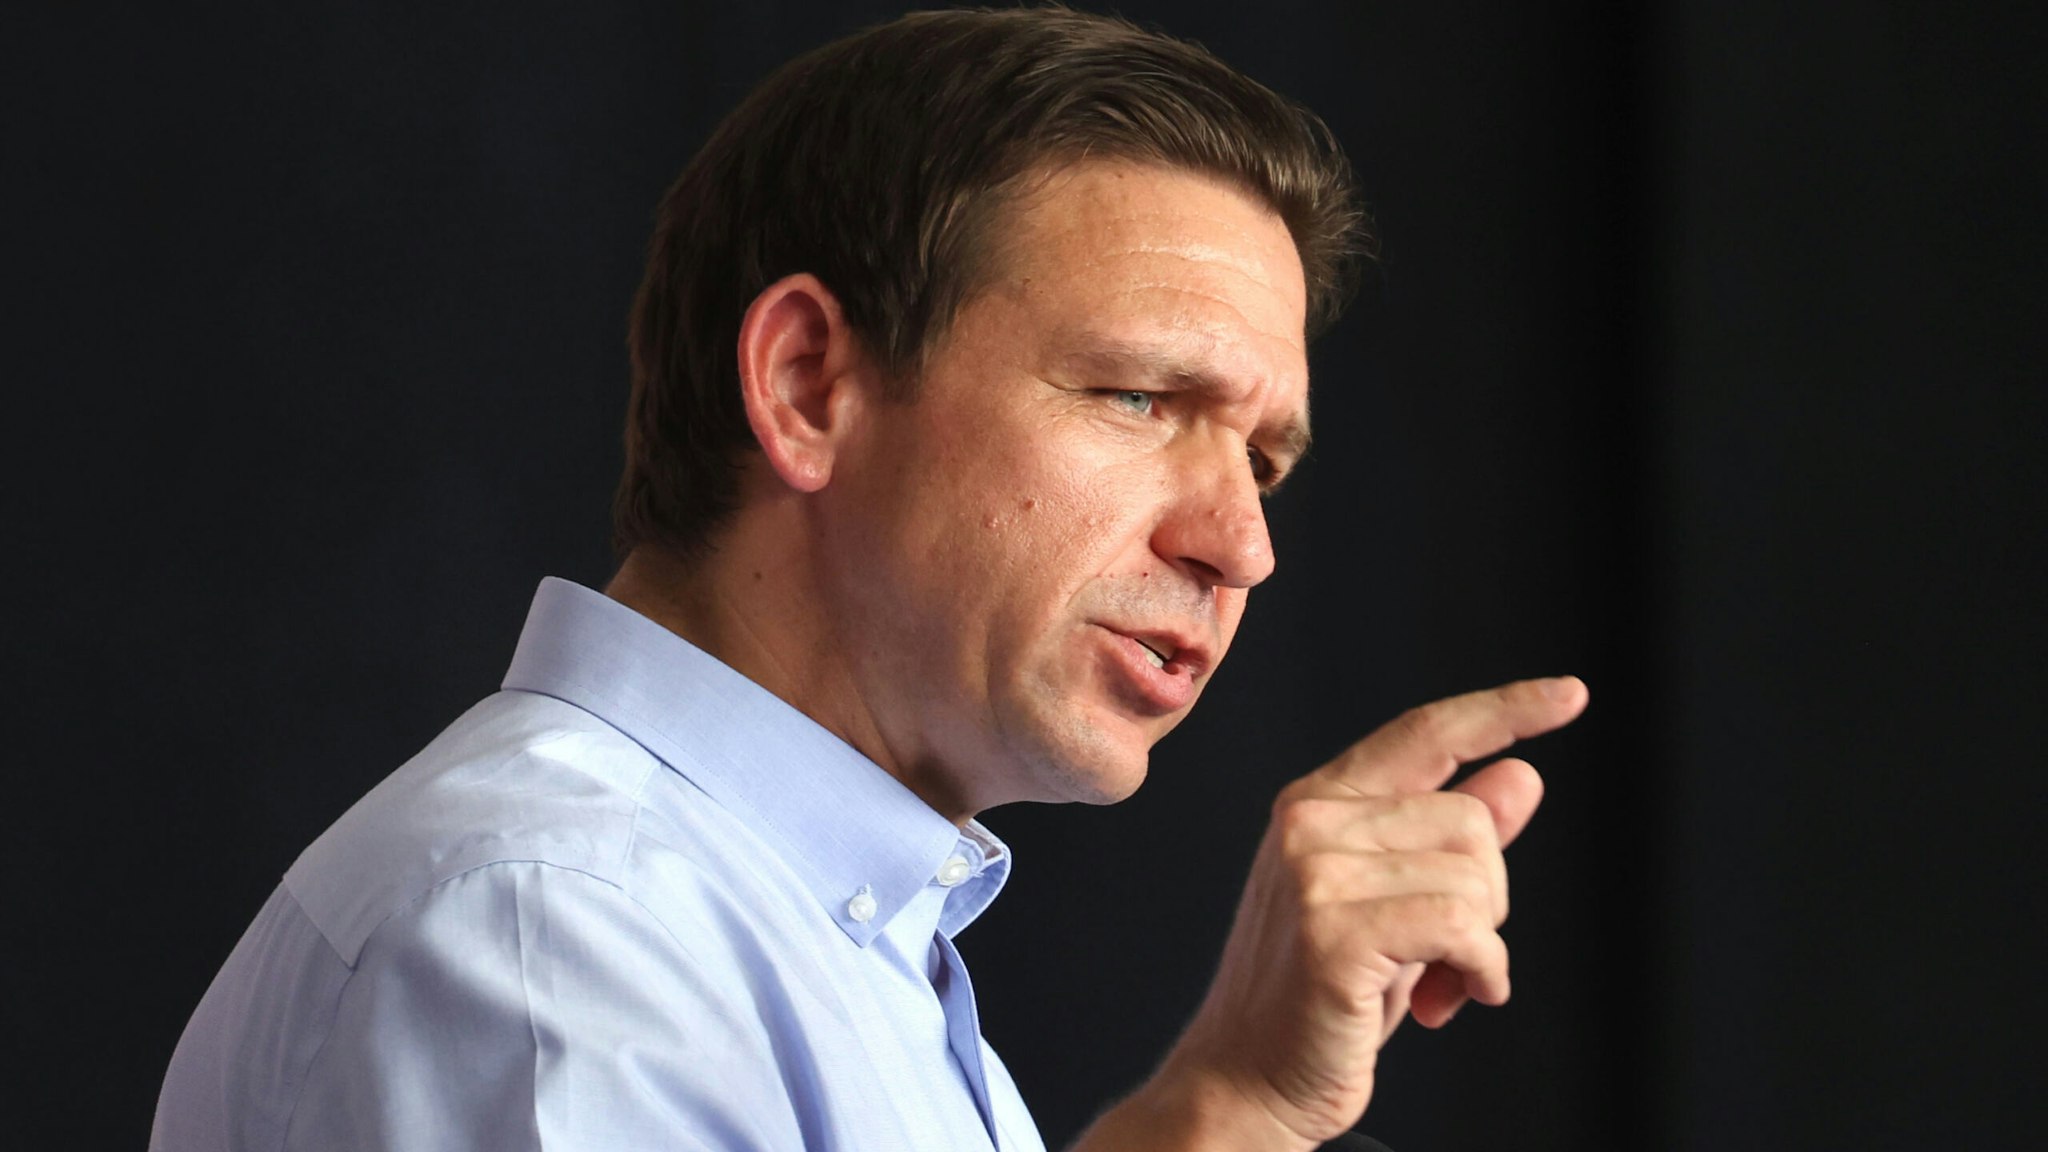 ANKENY, IOWA - JULY 15: Republican presidential candidate Florida Governor Ron DeSantis speaks at U.S. Rep. Zach Nunn’s “Operation Top Nunn: Salute to Our Troops" fundraiser on July 15, 2023 in Ankeny, Iowa. Yesterday DeSantis joined several other Republican presidential candidates at the Family Leadership Summit in nearby Des Moines.